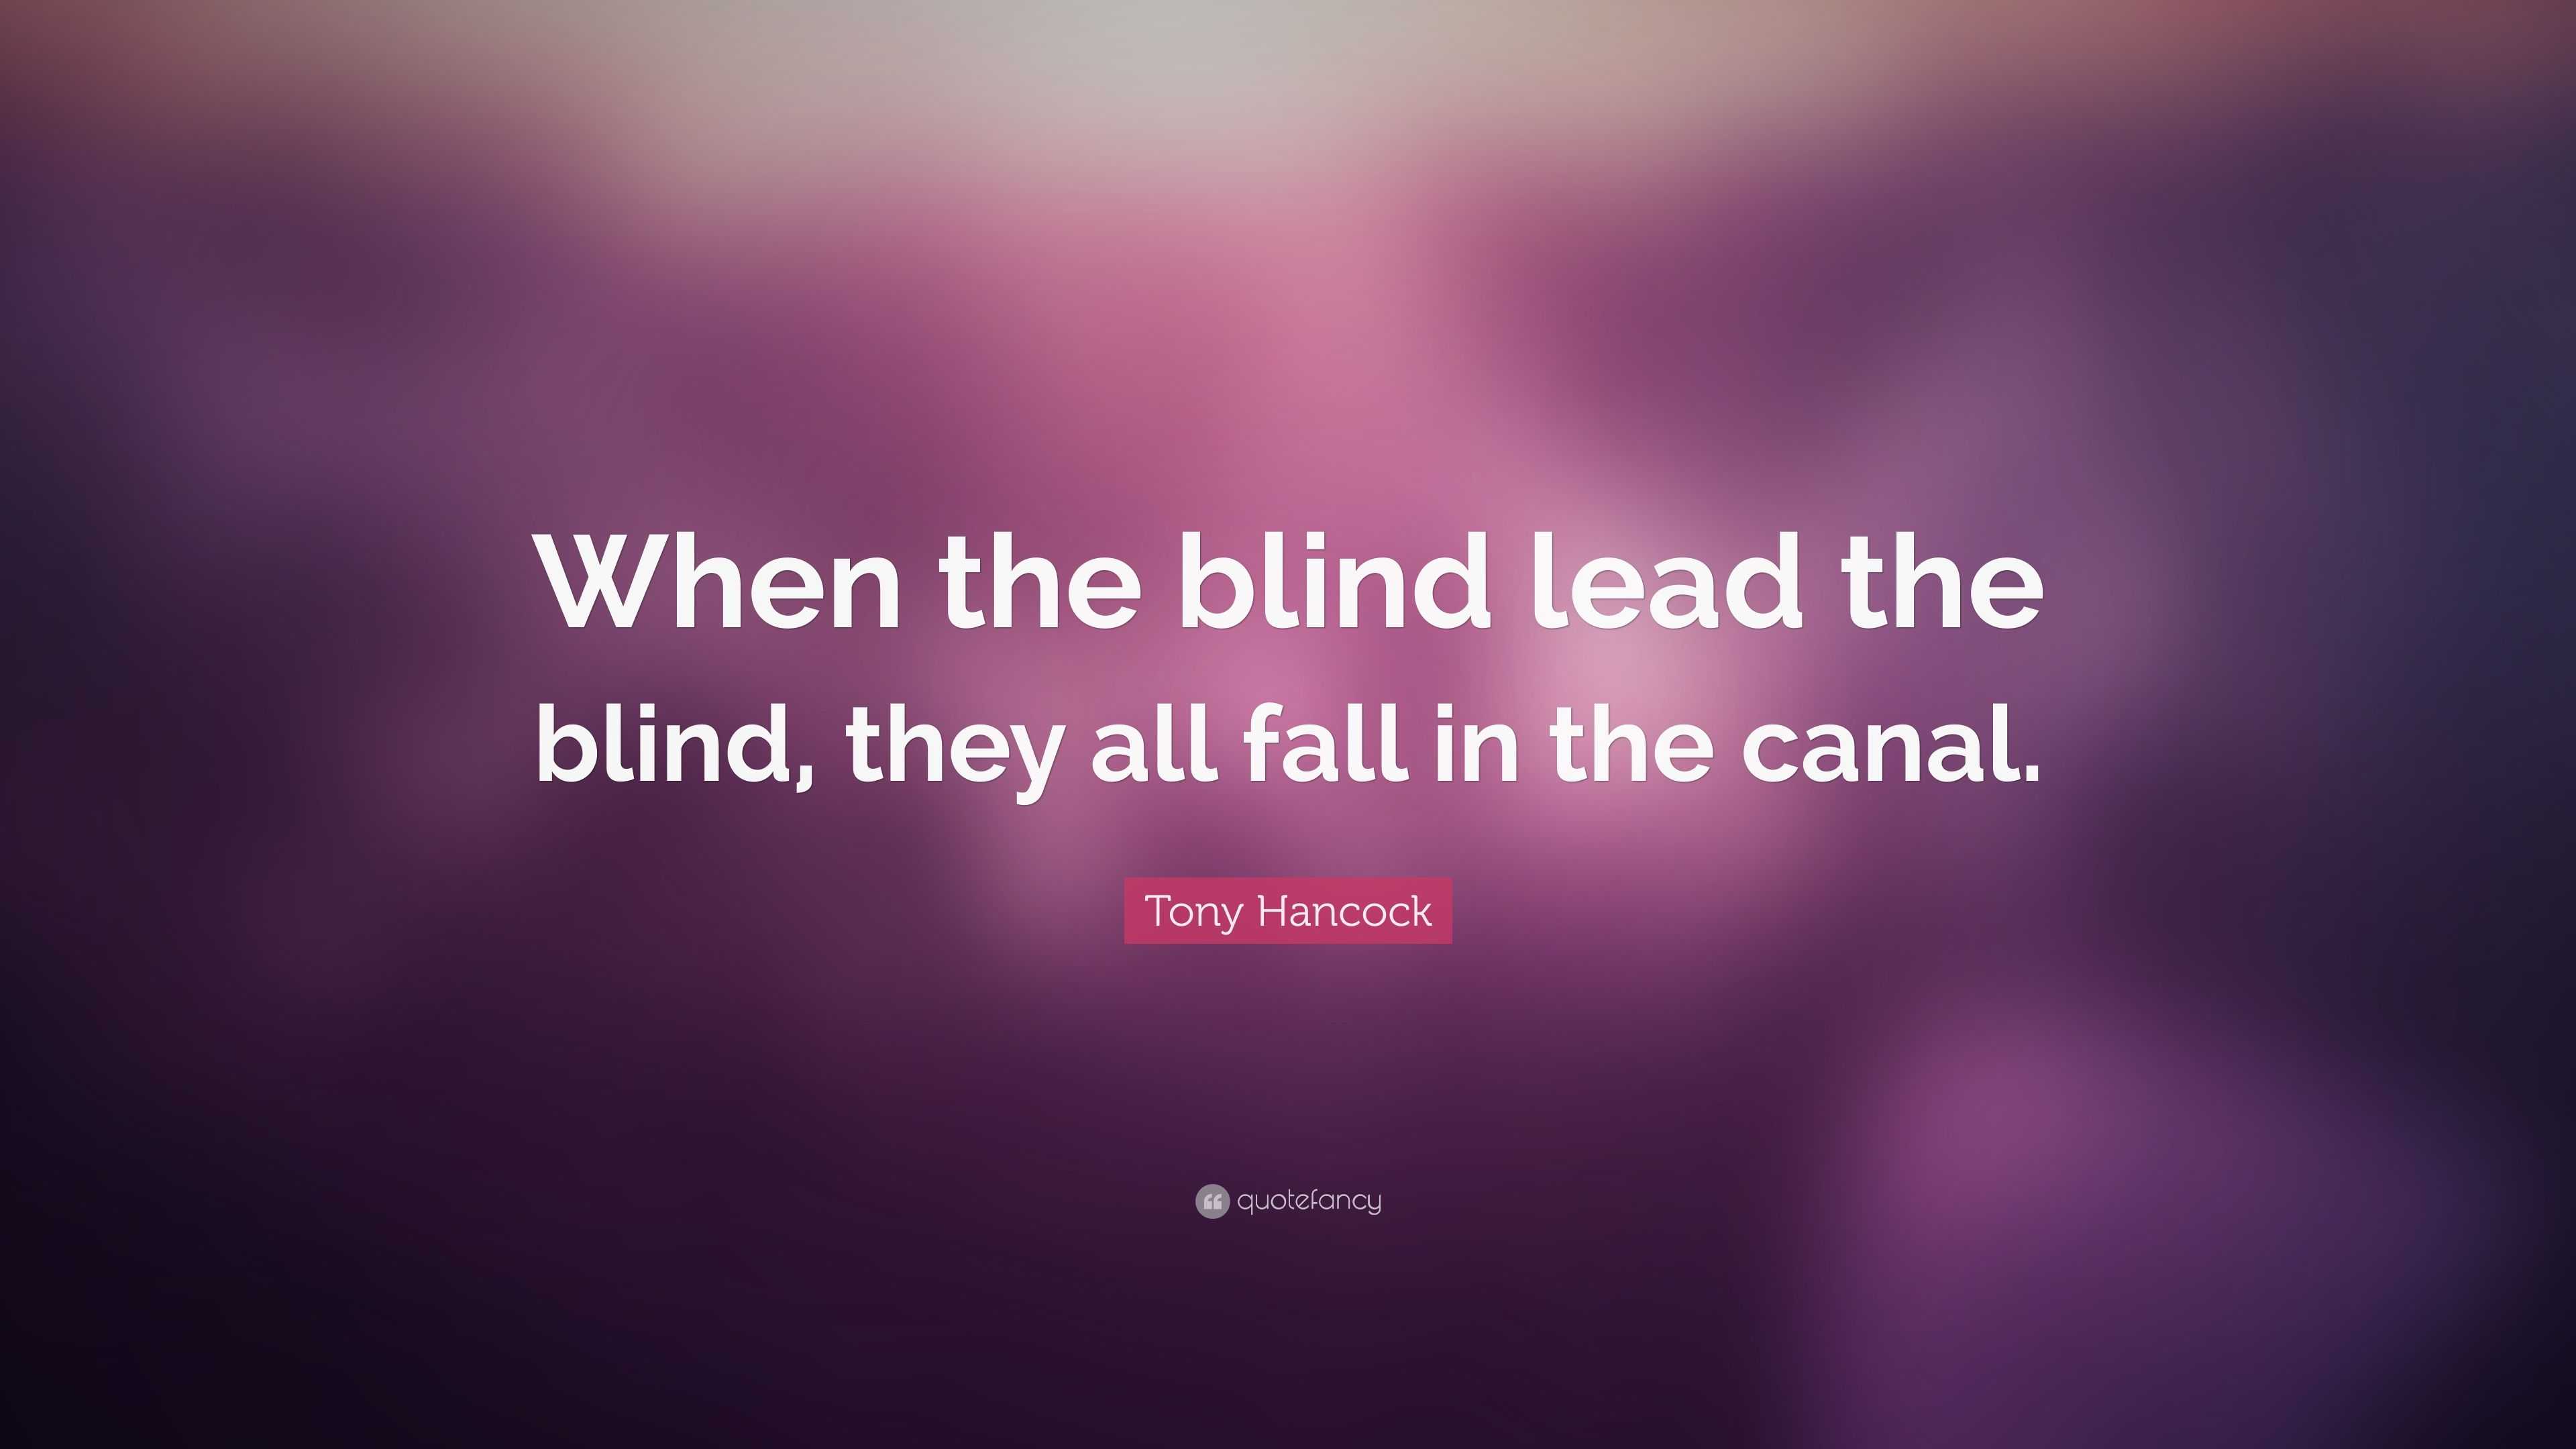 Tony Hancock Quote “when The Blind Lead The Blind They All Fall In The Canal” 